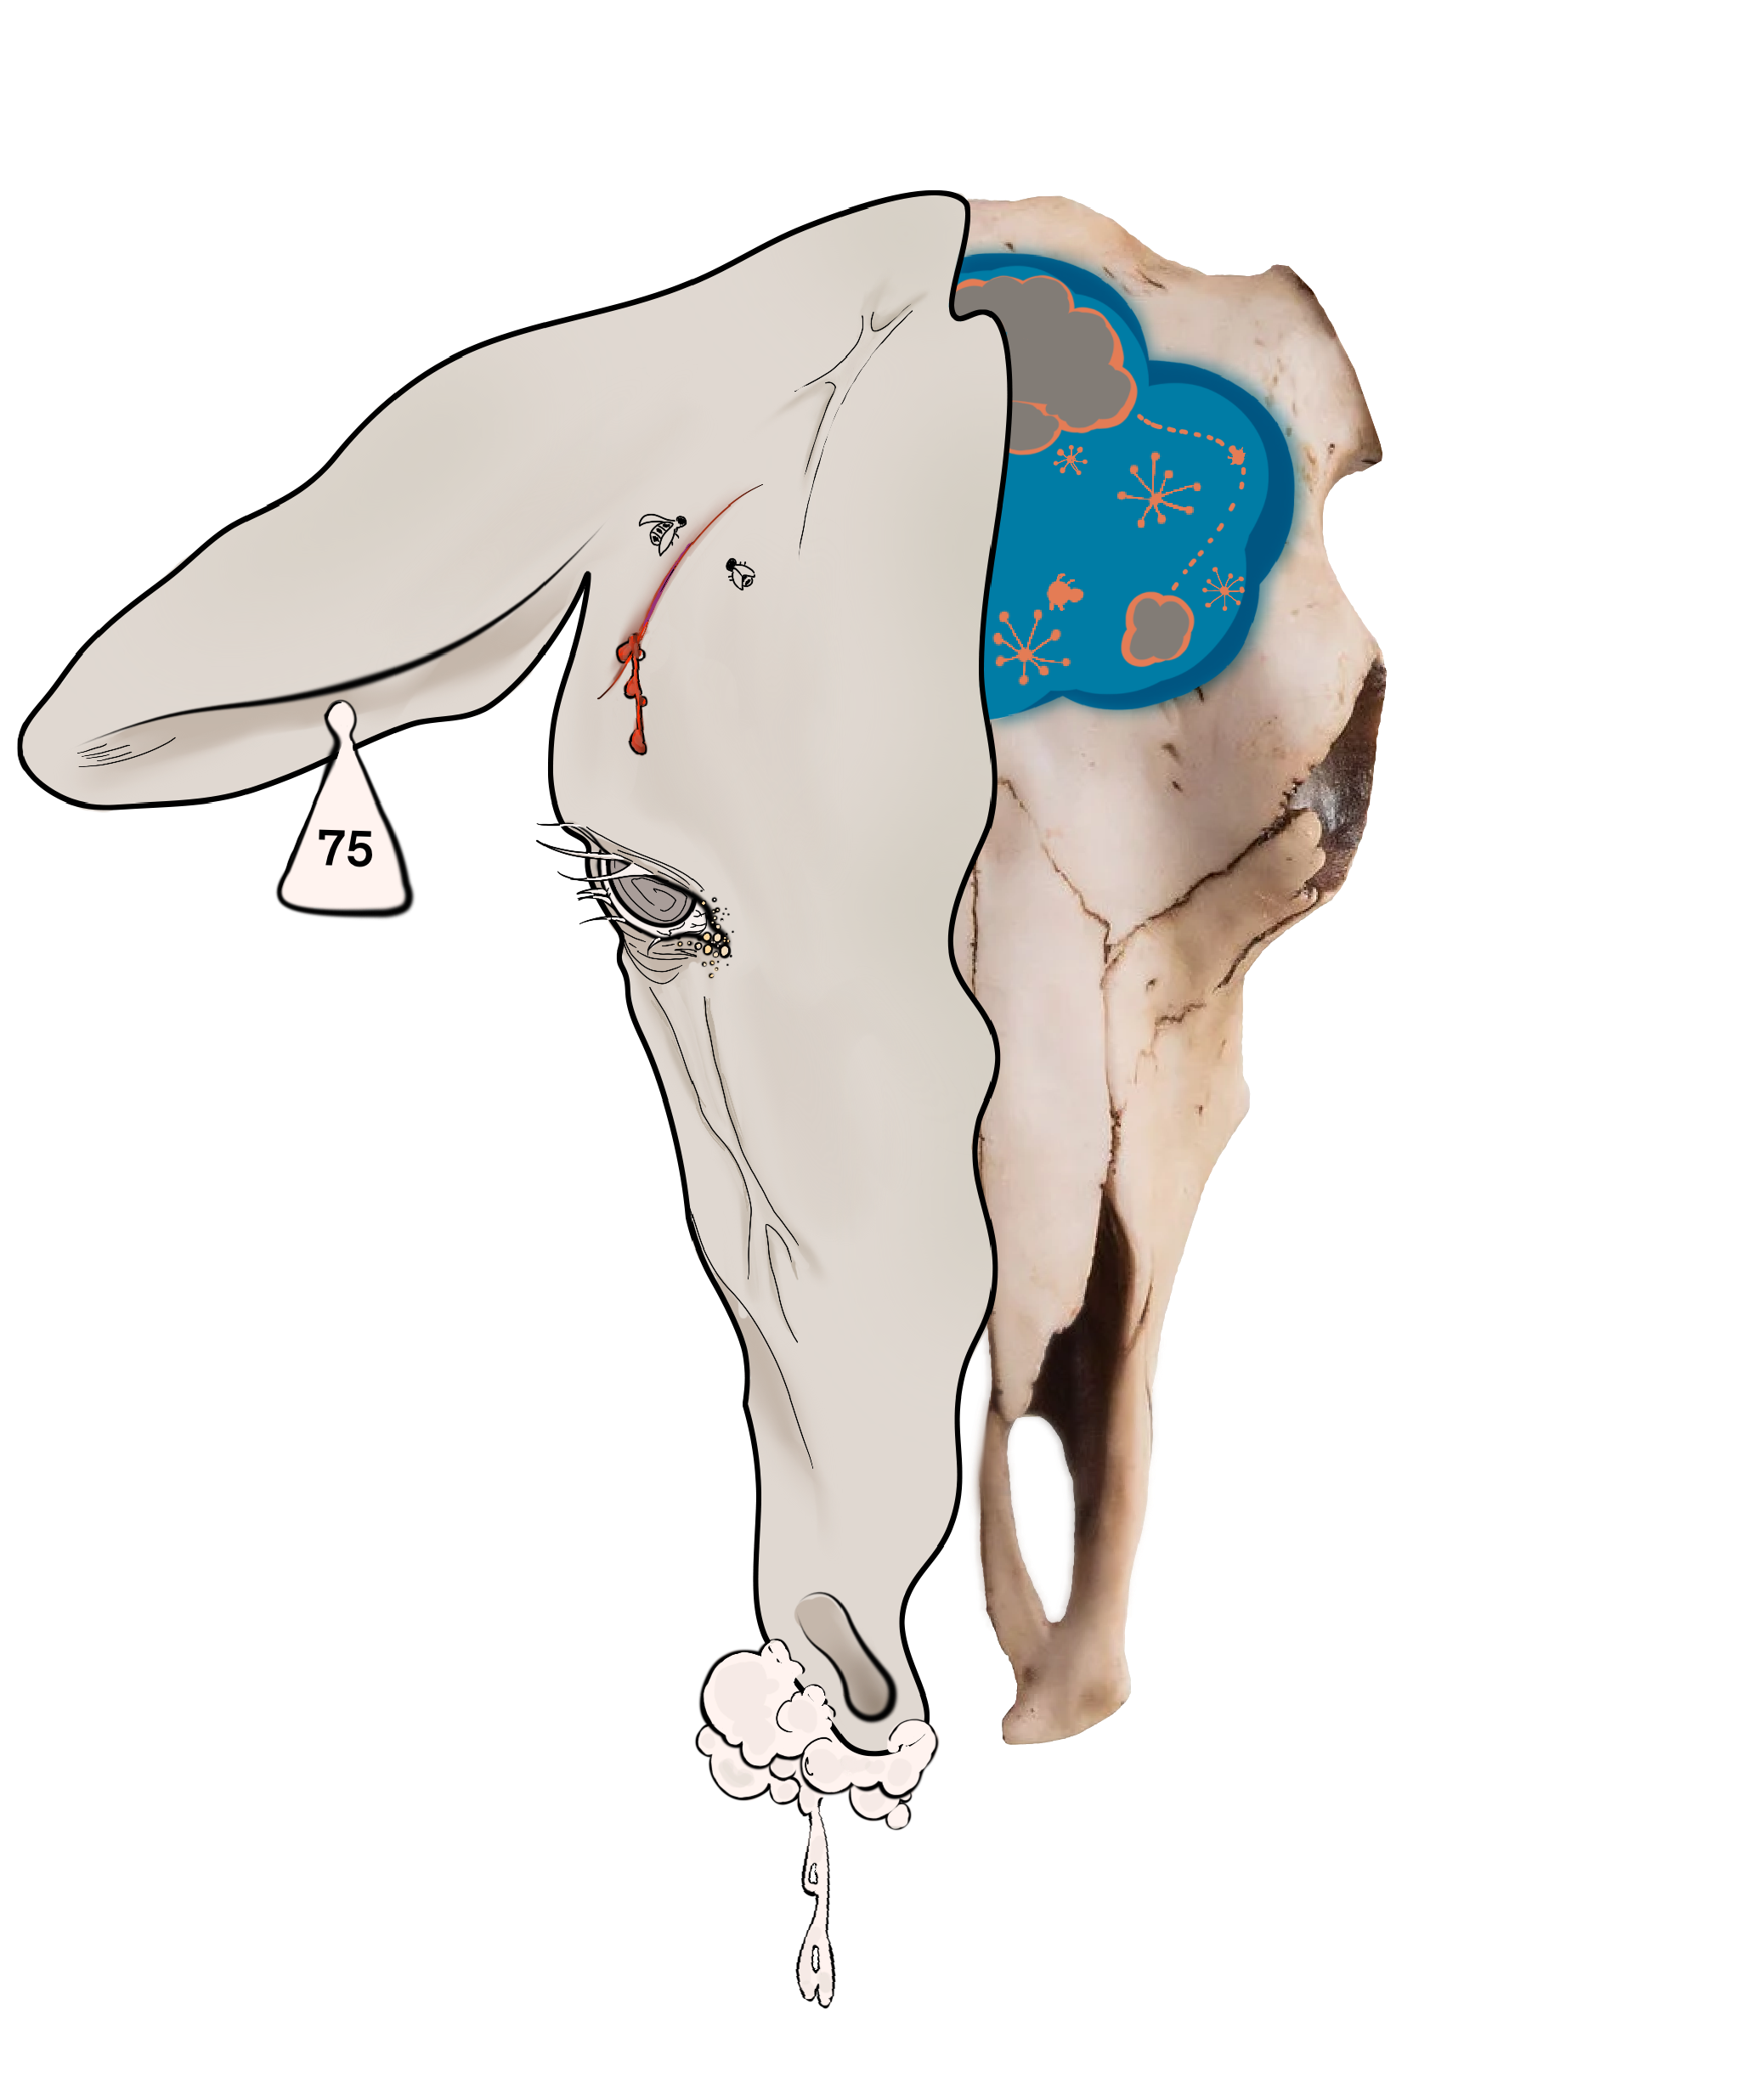 Beef is the most consumed type of meat in America, and the health of cows is important. This graphic illustrates a cow infected with Chronic Wasting Disease. The cow is malnourished and foaming at the mouth with flies eating at its open wound. Its eyes are unfocused and sunken in. These are warning signs that the brain is infected with brain-eating bacteria.